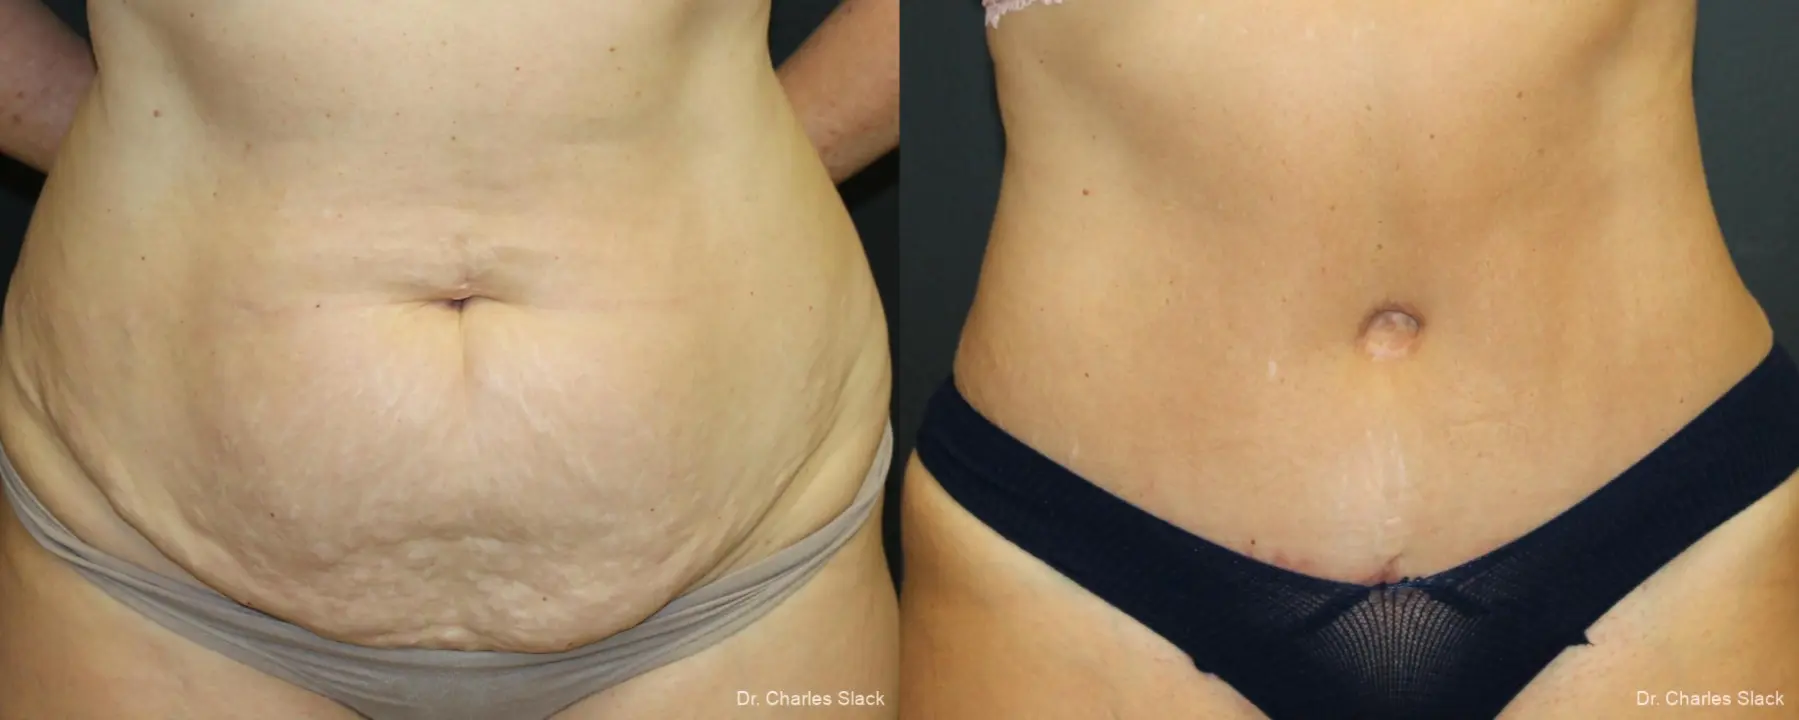 360 Body Contour: Patient 2 - Before and After  